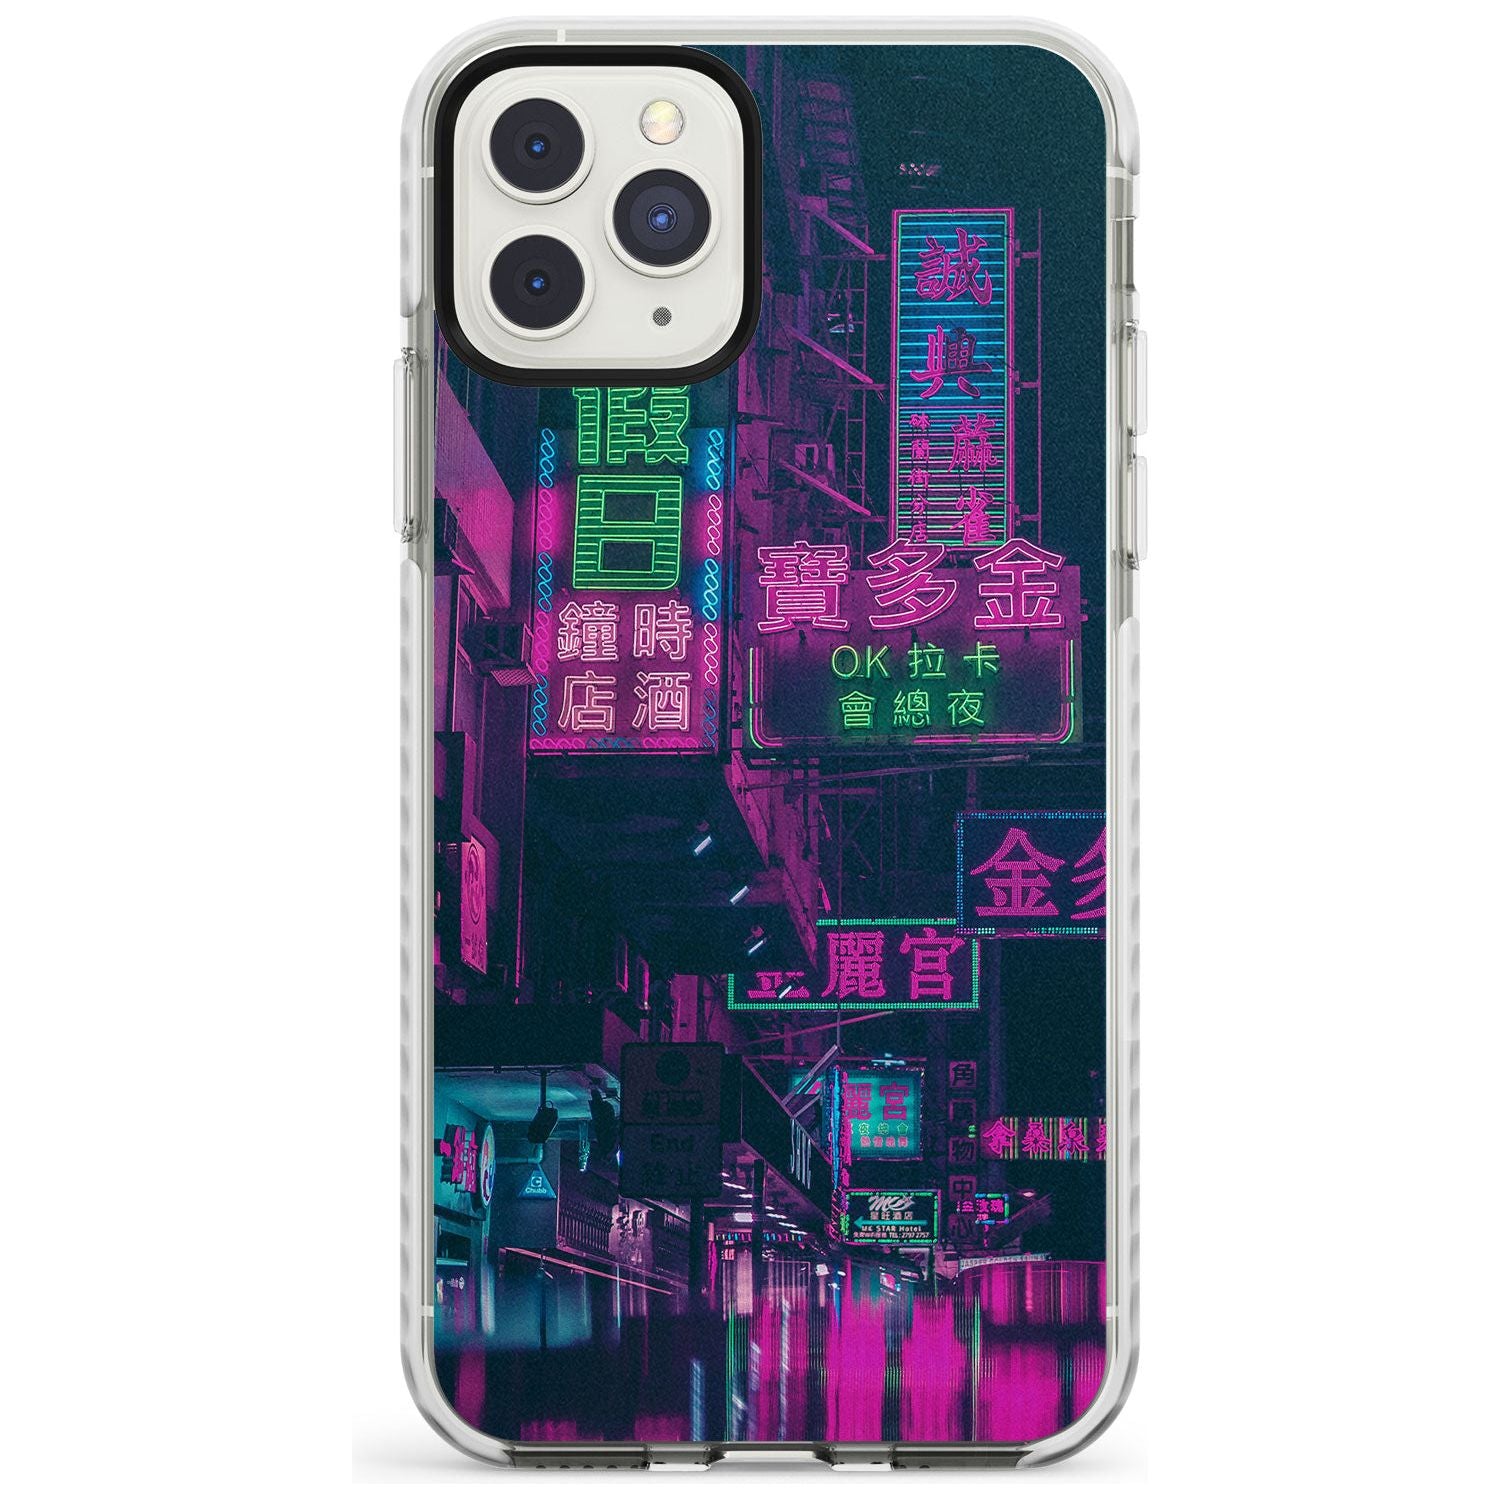 Rainy Reflections - Neon Cities Photographs Impact Phone Case for iPhone 11 Pro Max